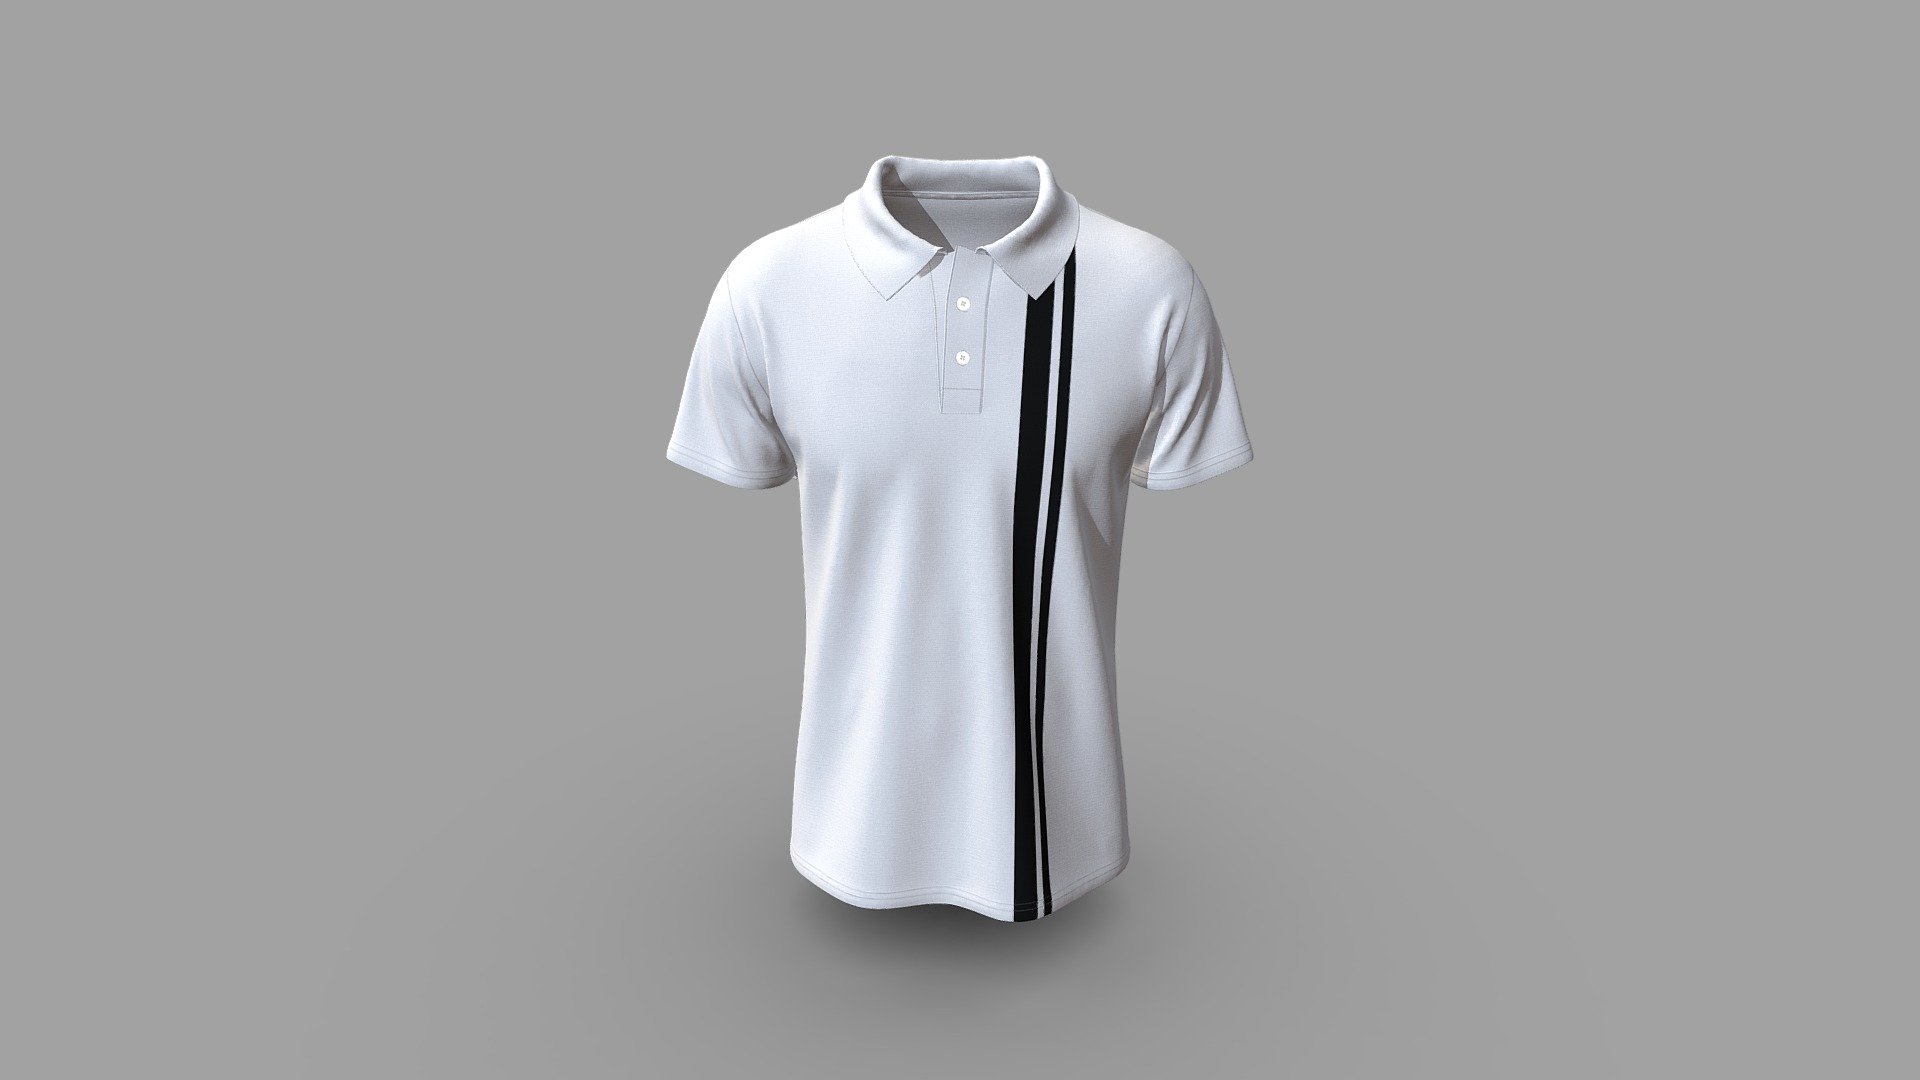 Cloth Title = Mens Knit Fashion Polo Clothing 

SKU = DG100201 

Category = Men 

Product Type = Polo 

Cloth Length = Regular 

Body Fit = Regular Fit 

Occasion = Casual  

Sleeve Style = Short Sleeve 


Our Services:

3D Apparel Design.

OBJ,FBX,GLTF Making with High/Low Poly.

Fabric Digitalization.

Mockup making.

3D Teck Pack.

Pattern Making.

2D Illustration.

Cloth Animation and 360 Spin Video.


Contact us:- 

Email: info@digitalfashionwear.com 

Website: https://digitalfashionwear.com 


We designed all the types of cloth specially focused on product visualization, e-commerce, fitting, and production. 

We will design: 

T-shirts 

Polo shirts 

Hoodies 

Sweatshirt 

Jackets 

Shirts 

TankTops 

Trousers 

Bras 

Underwear 

Blazer 

Aprons 

Leggings 

and All Fashion items. 





Our goal is to make sure what we provide you, meets your demand 3d model